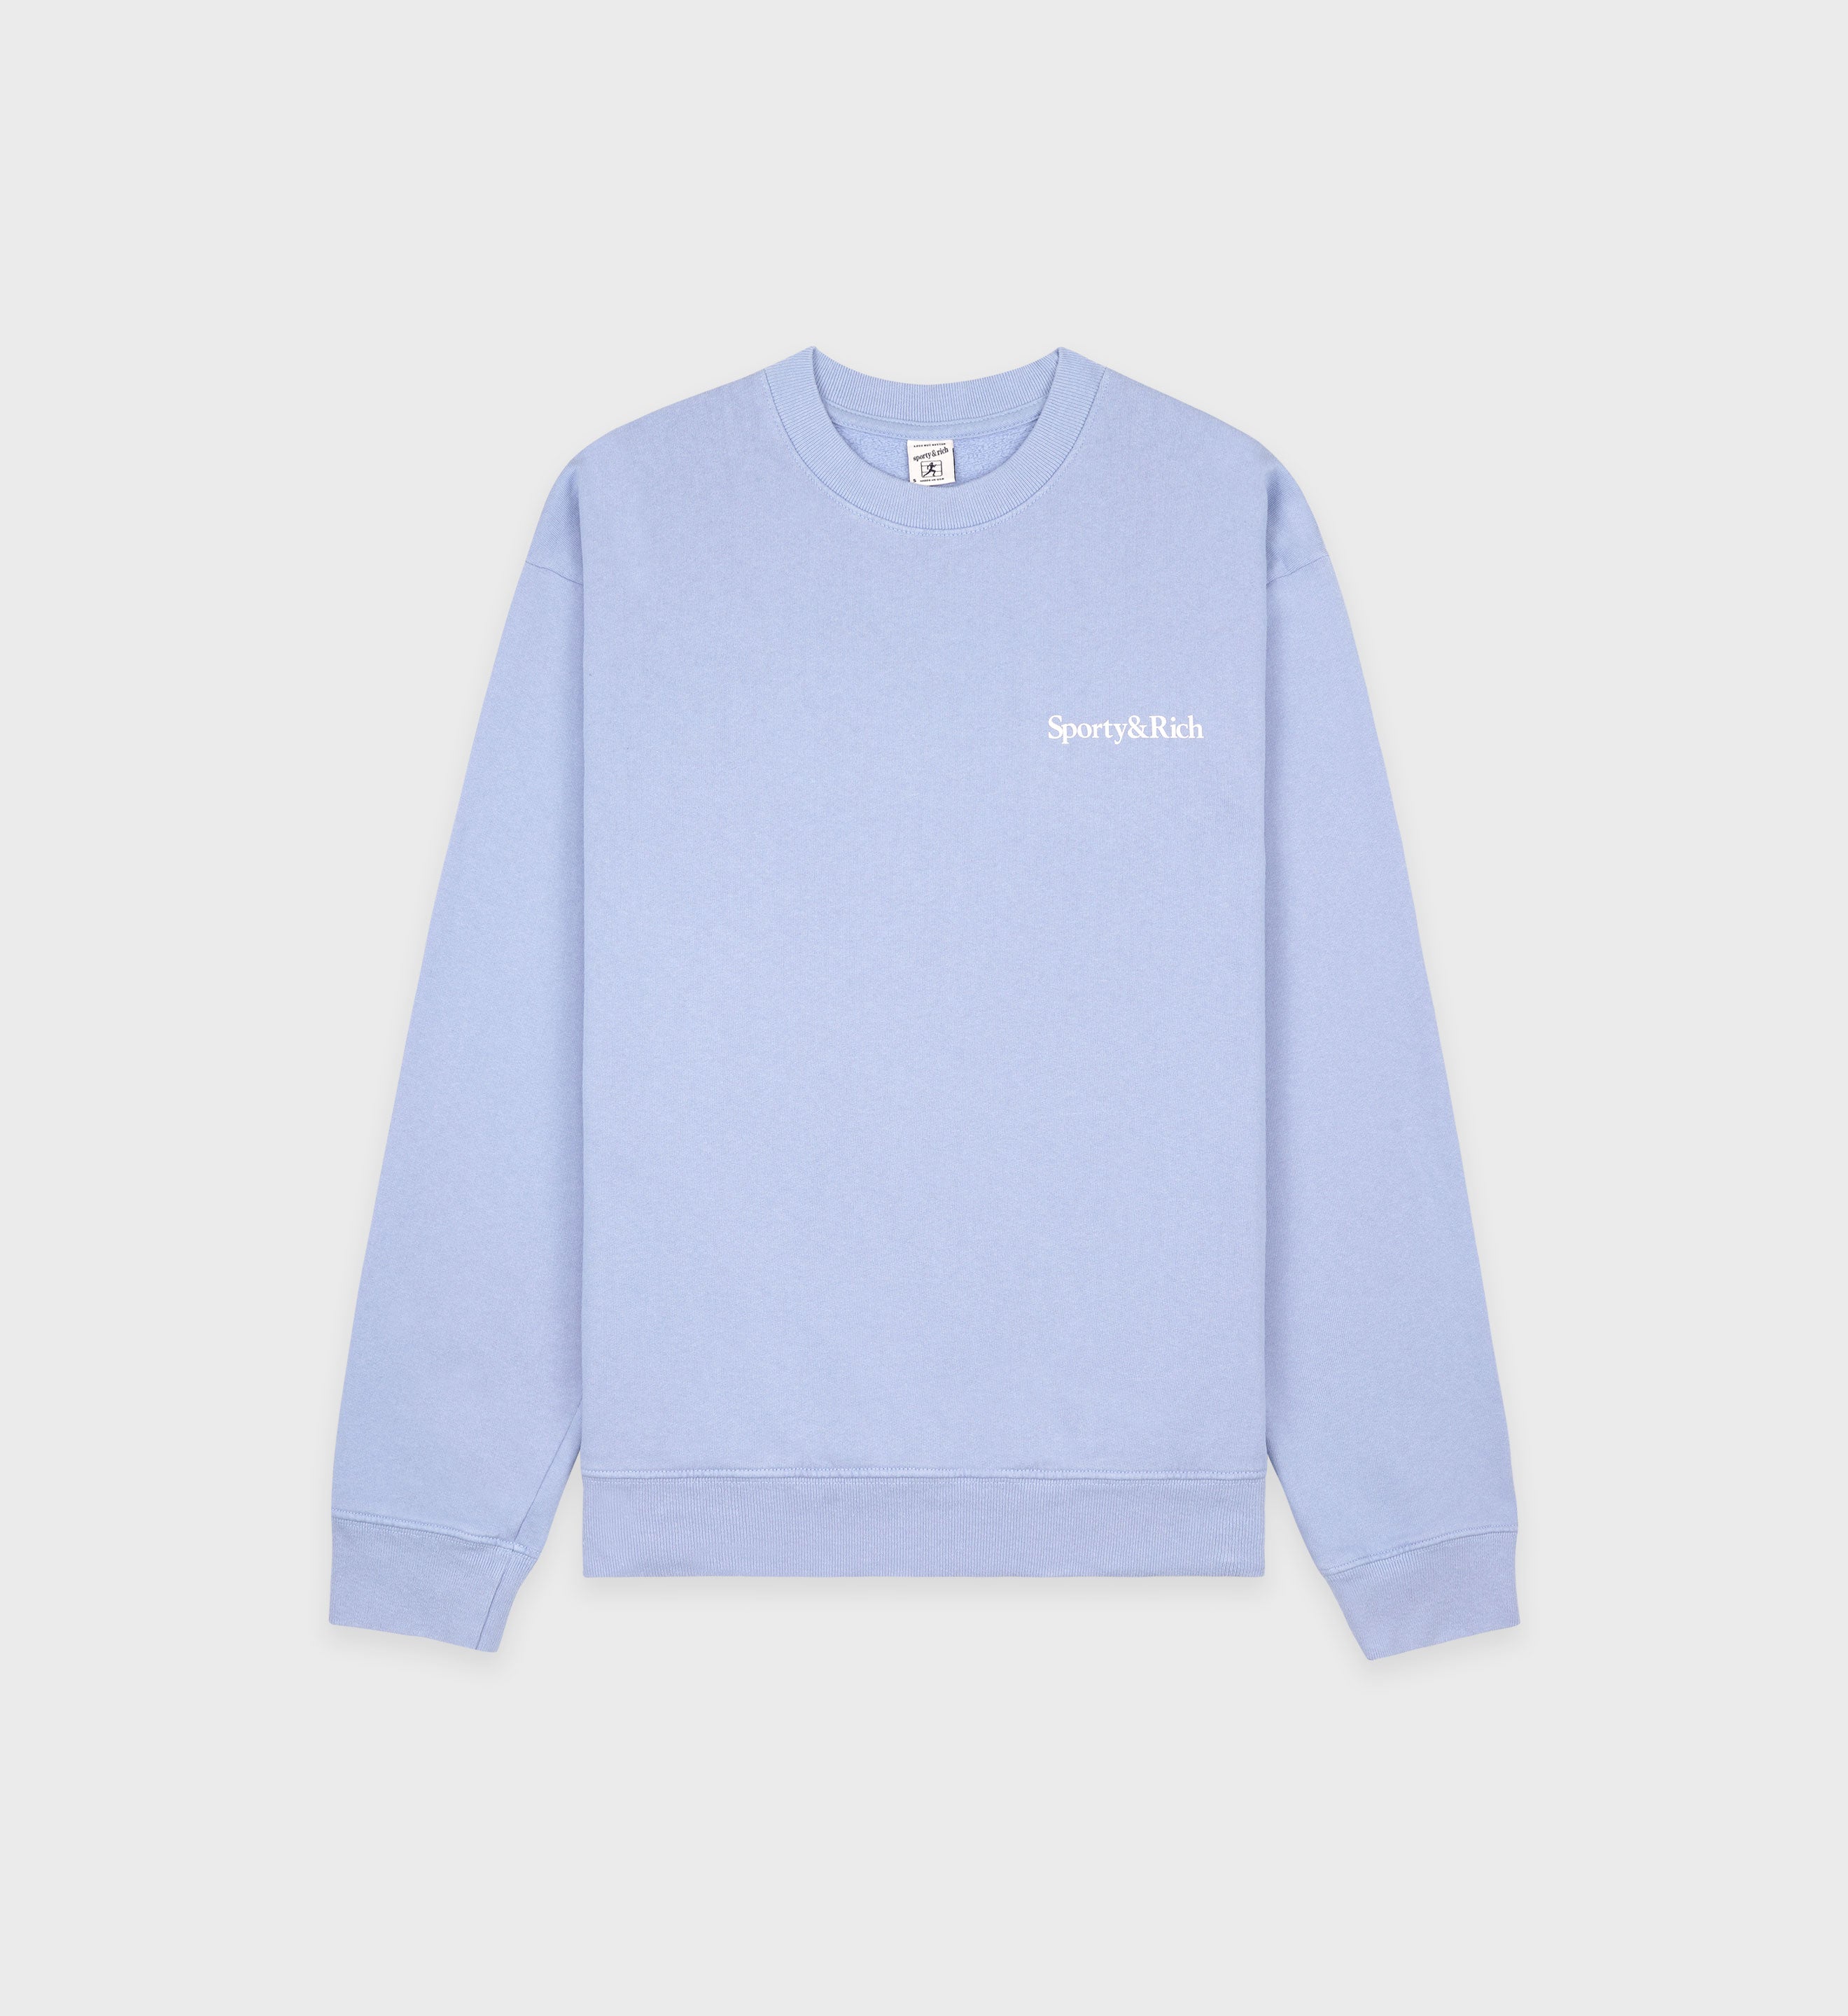 Health Is Wealth Crewneck - Periwinkle/White – Sporty & Rich